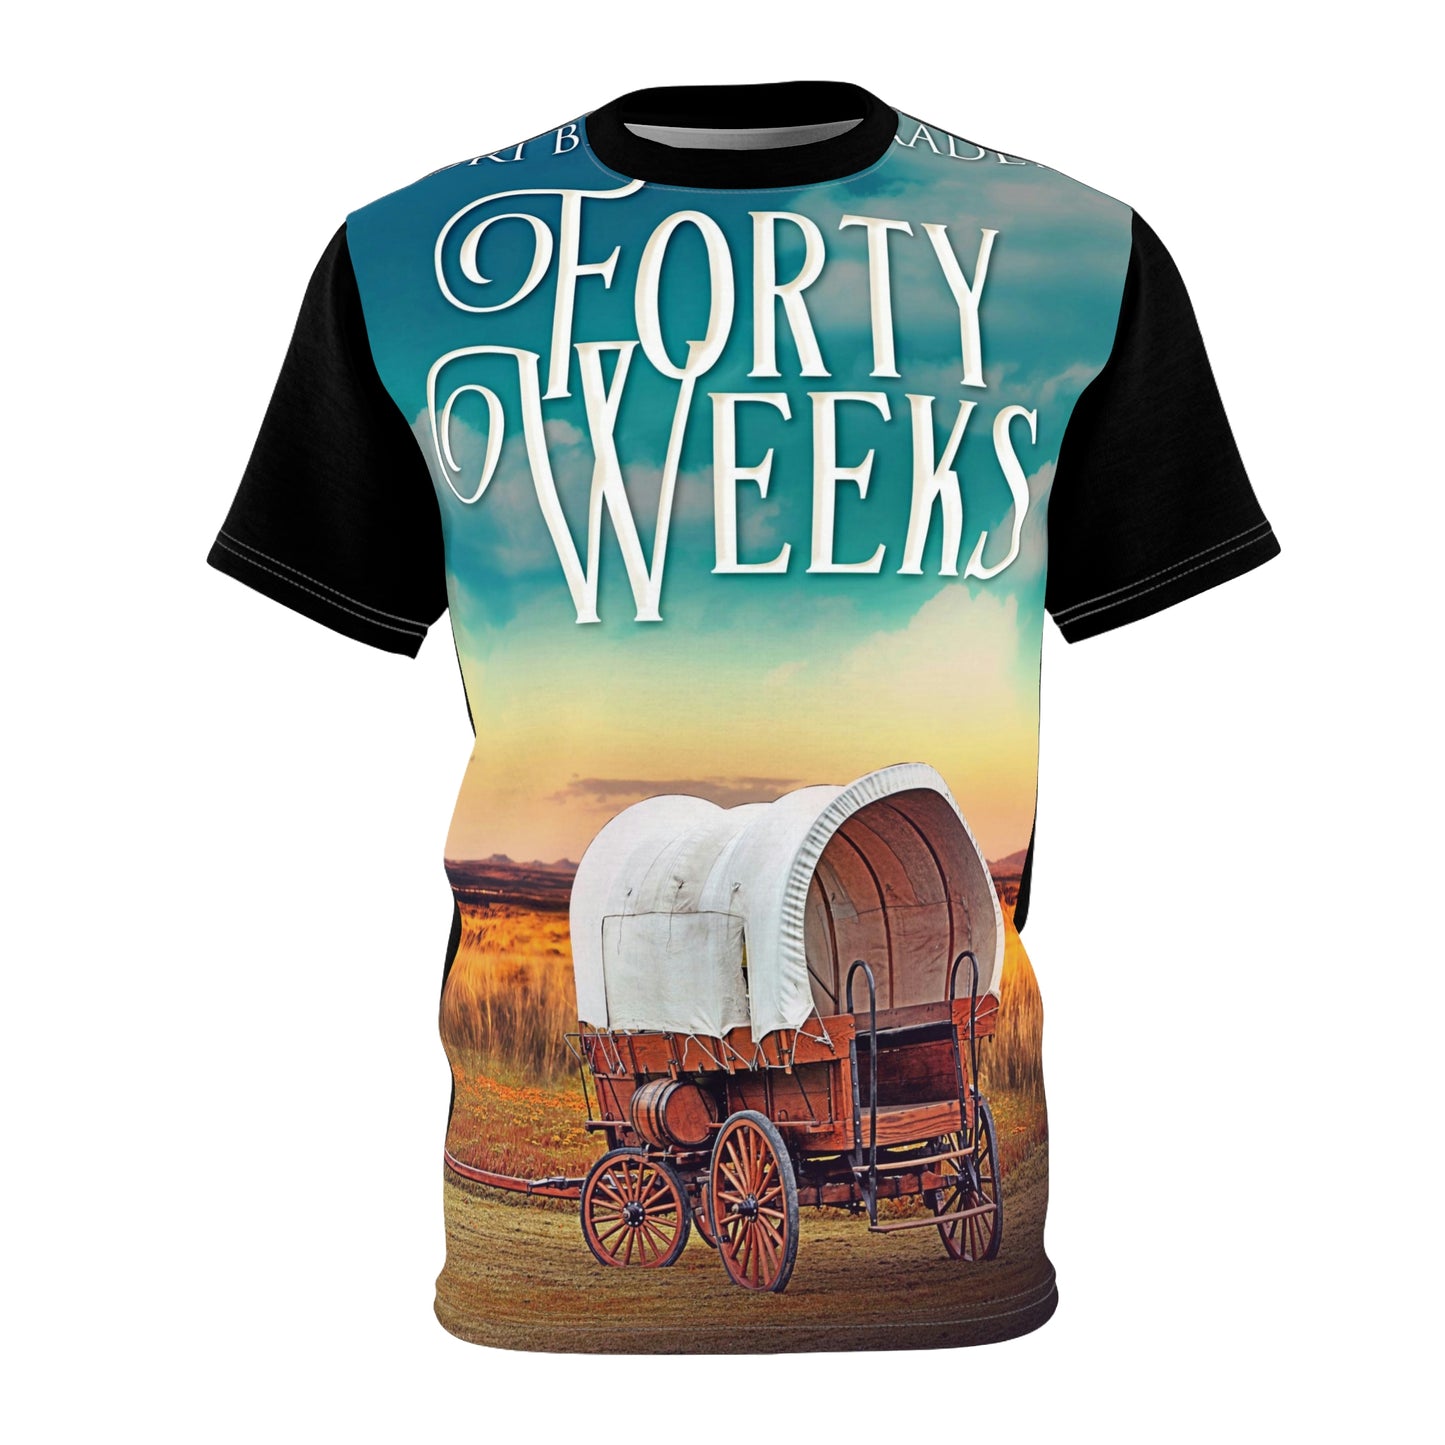 Forty Weeks - Unisex All-Over Print Cut & Sew T-Shirt